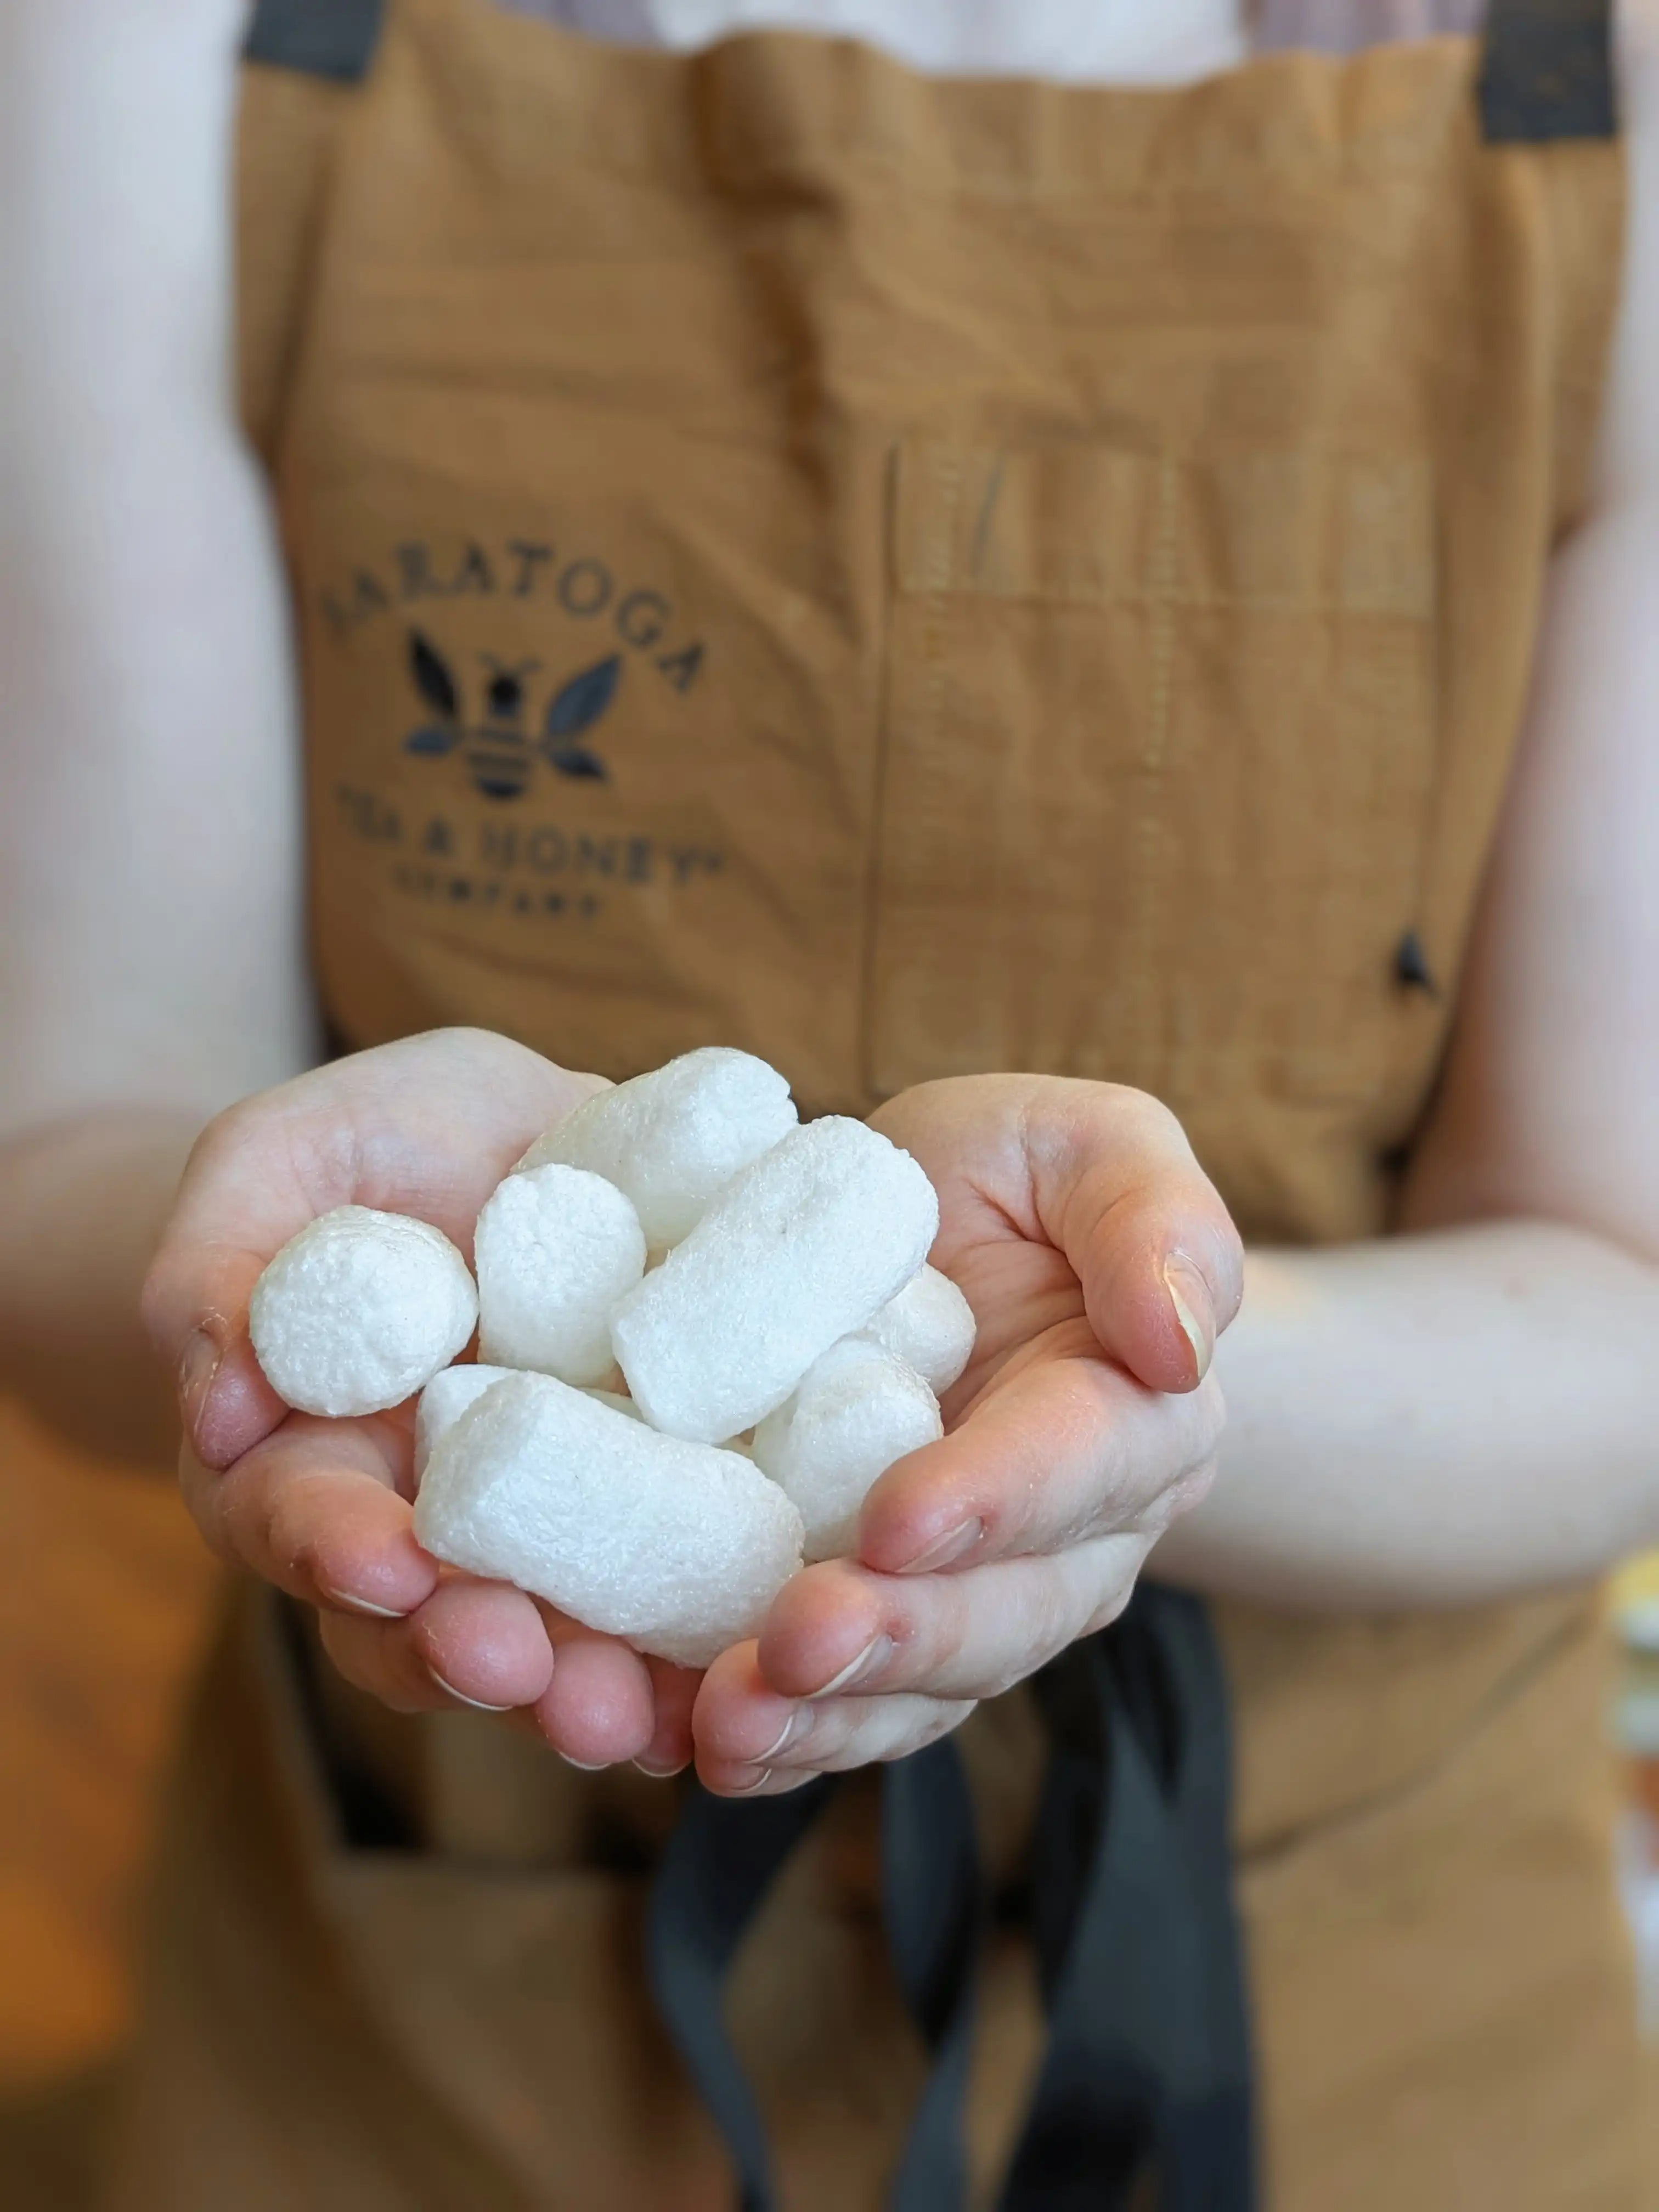 hands cupping a pile of biodegradable packing peanuts in front of a Saratoga Tea & Honey Co. staff apron